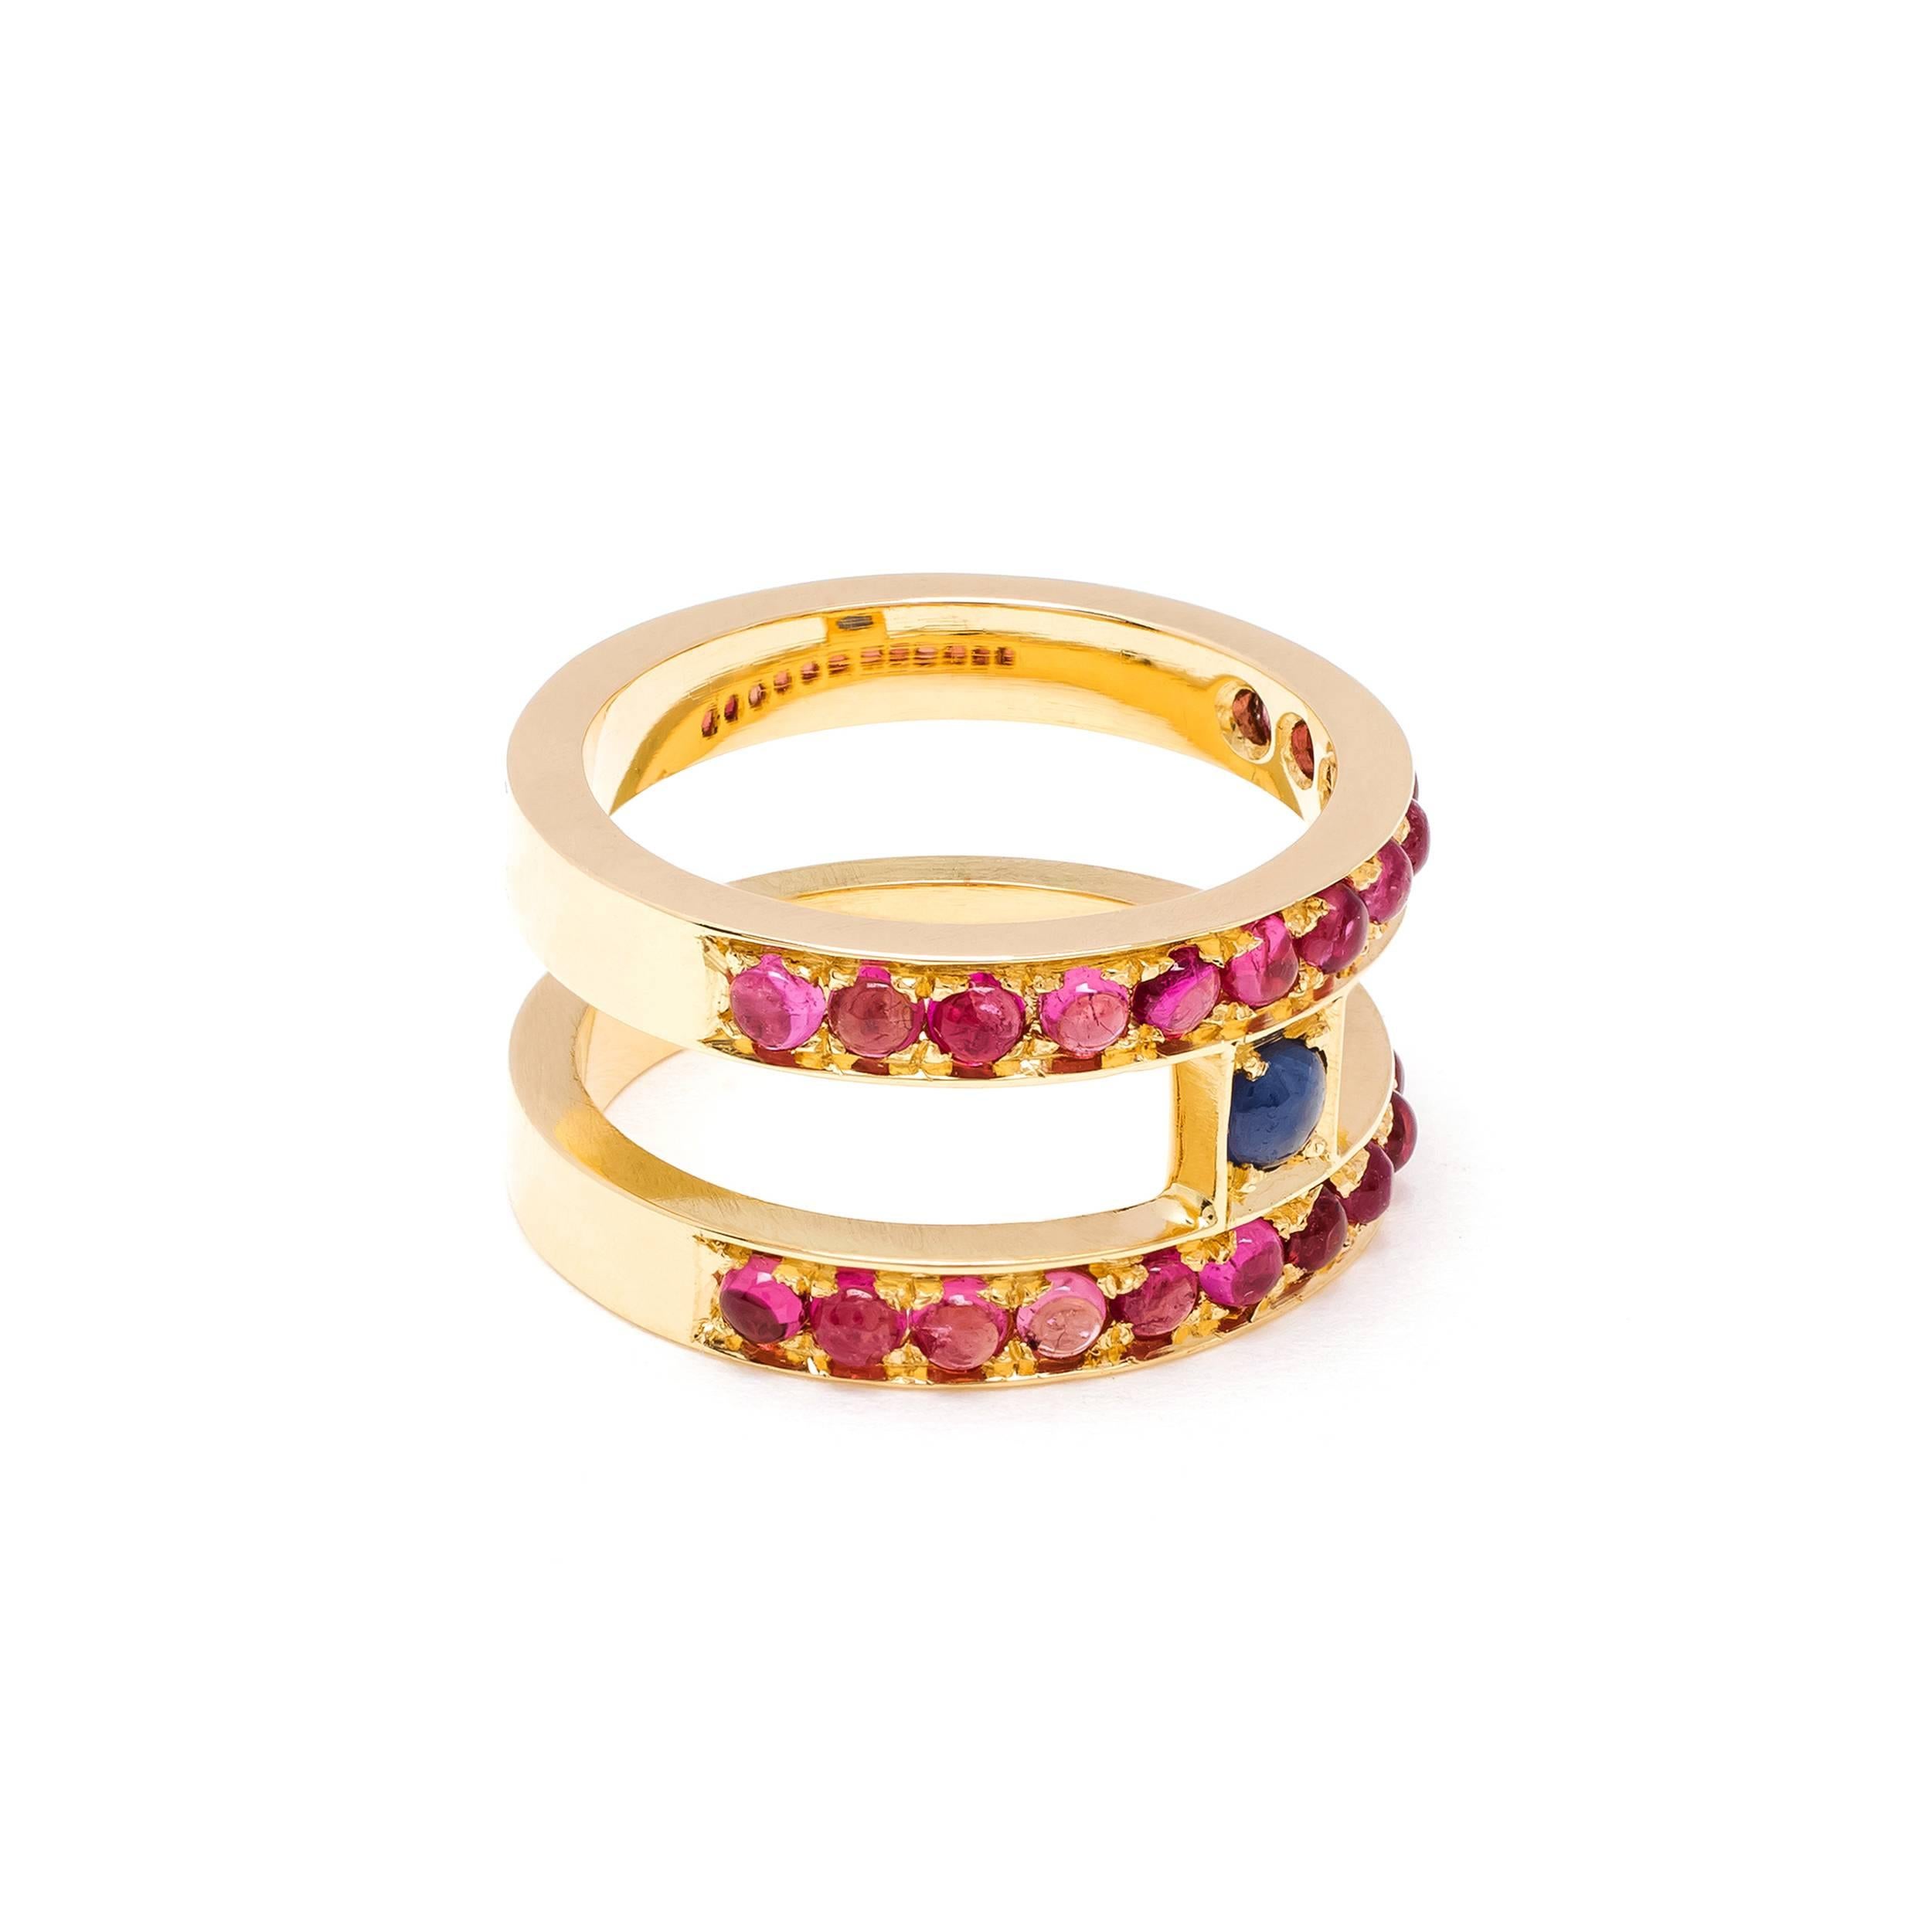 This DUBINI ring from the 'Theodora' collection features sapphire and rubellite tourmaline cabochons set in 18K yellow gold. 

…………………………………………………………………………………………………………………………………………………………………….

Inspired by Empress Theodora, wife of Justinian I, she